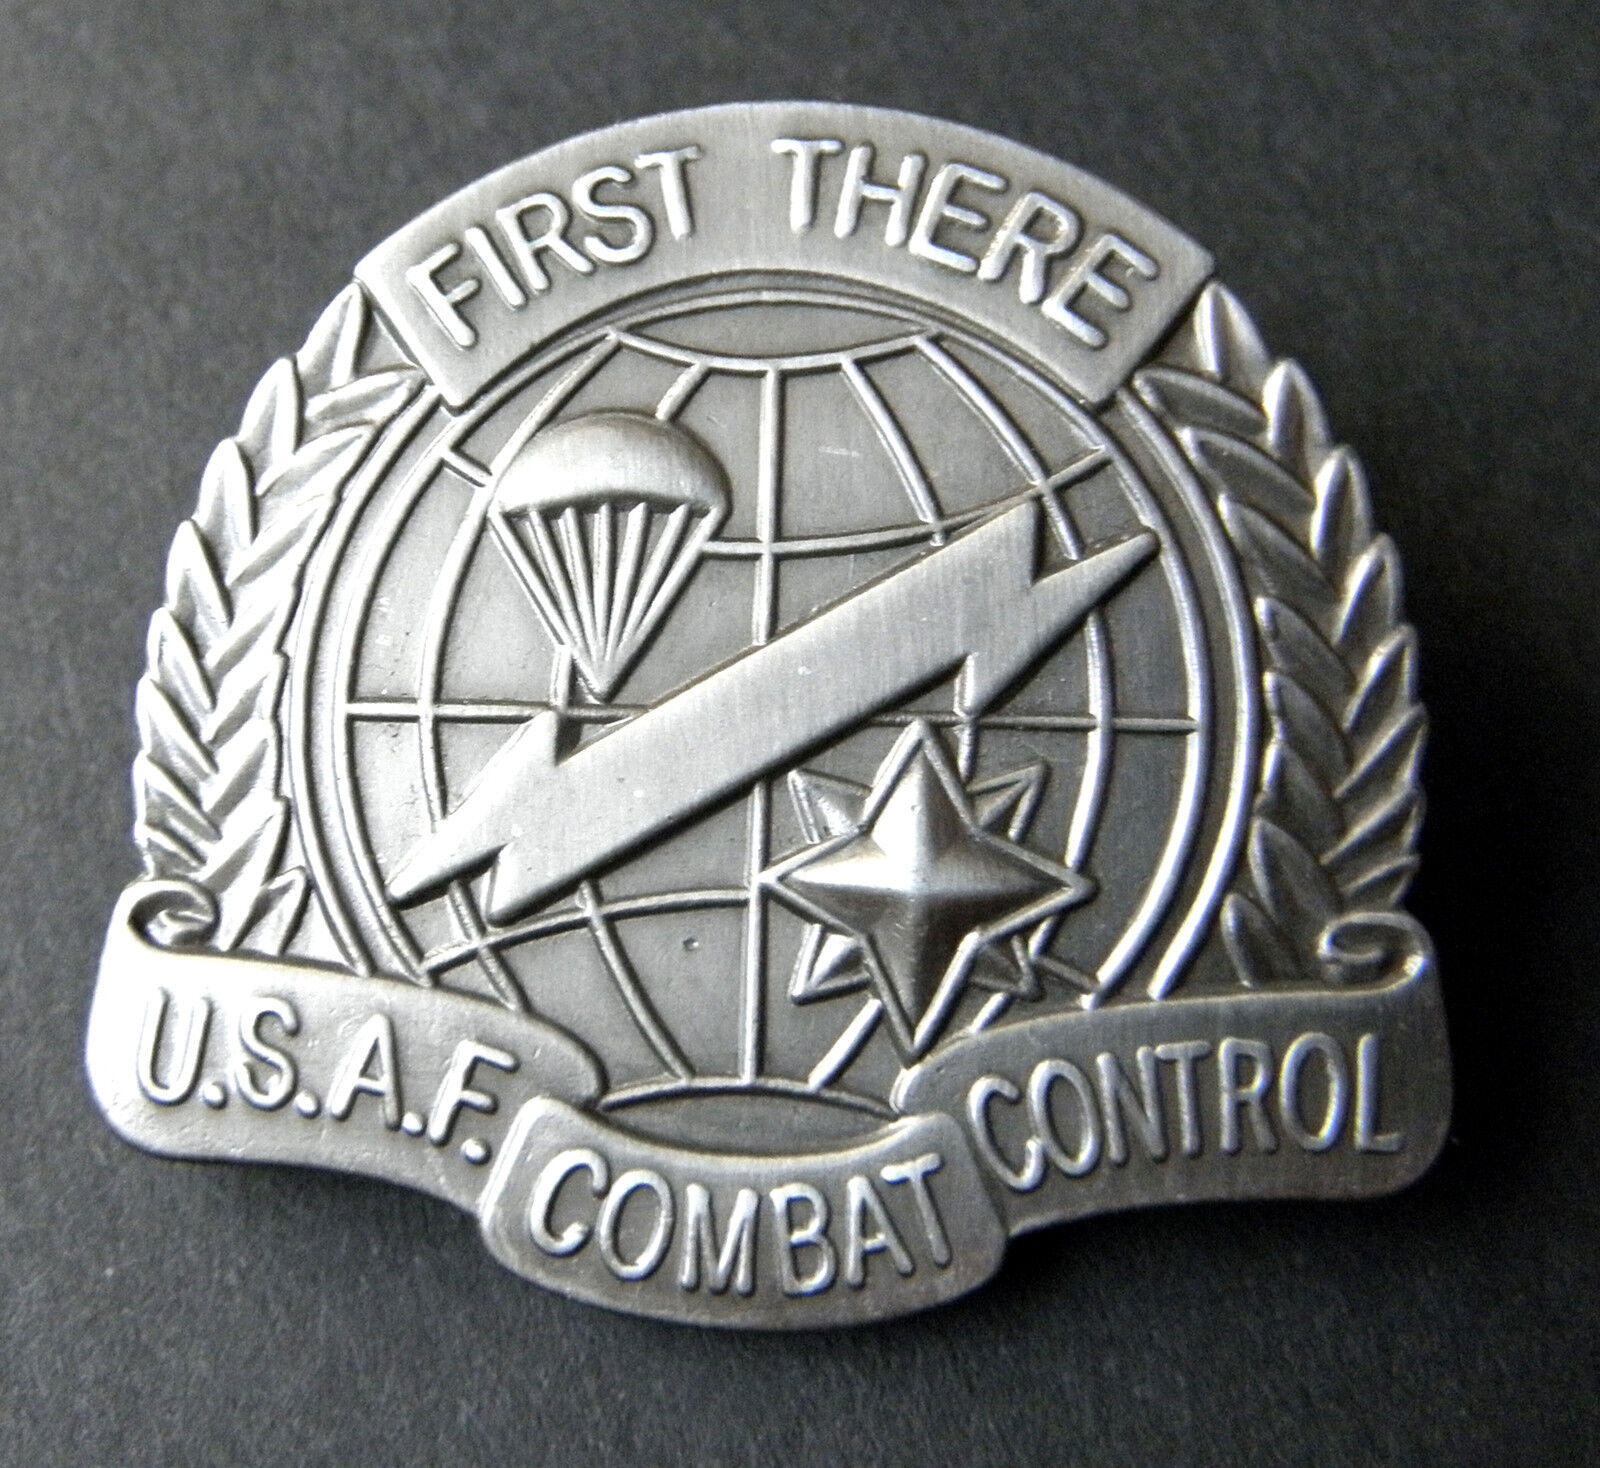 USAF Air Force Combat Control Large Cap Hat Jacket Pin 1.5 inches